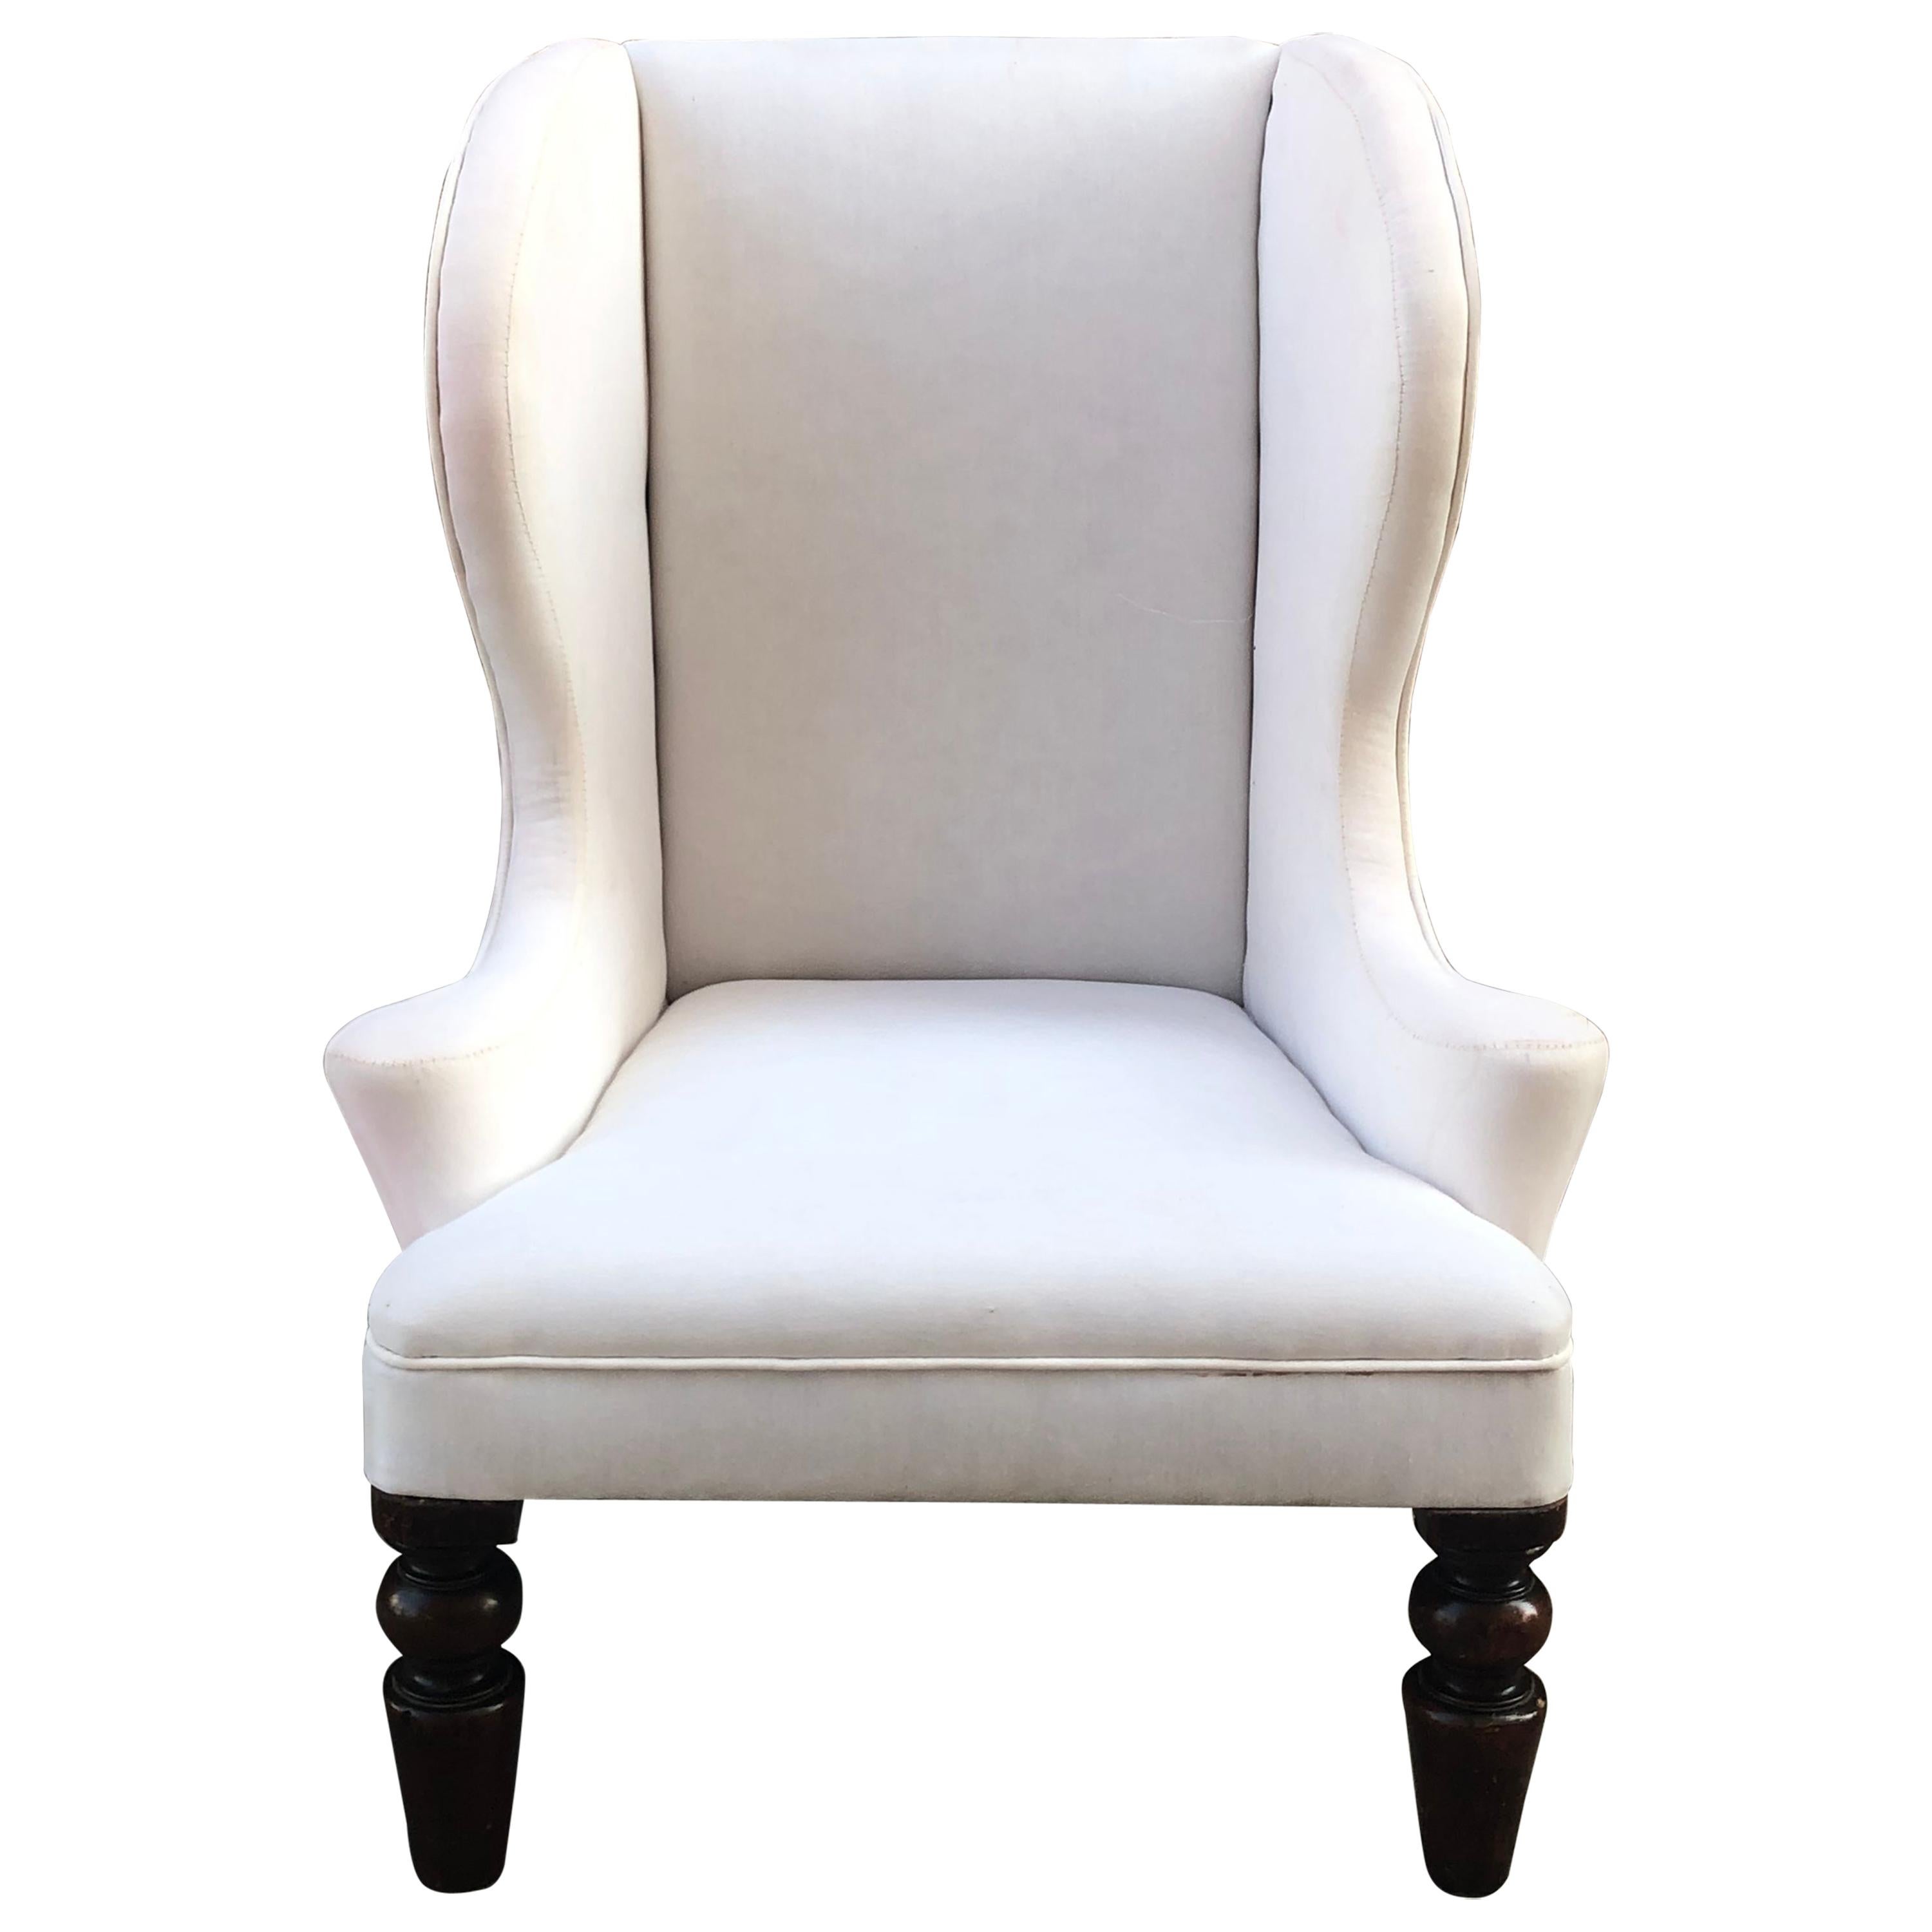 Child’s Wingback Chair with Scrolled Arms and Mahogany Turned Legs, circa 1840